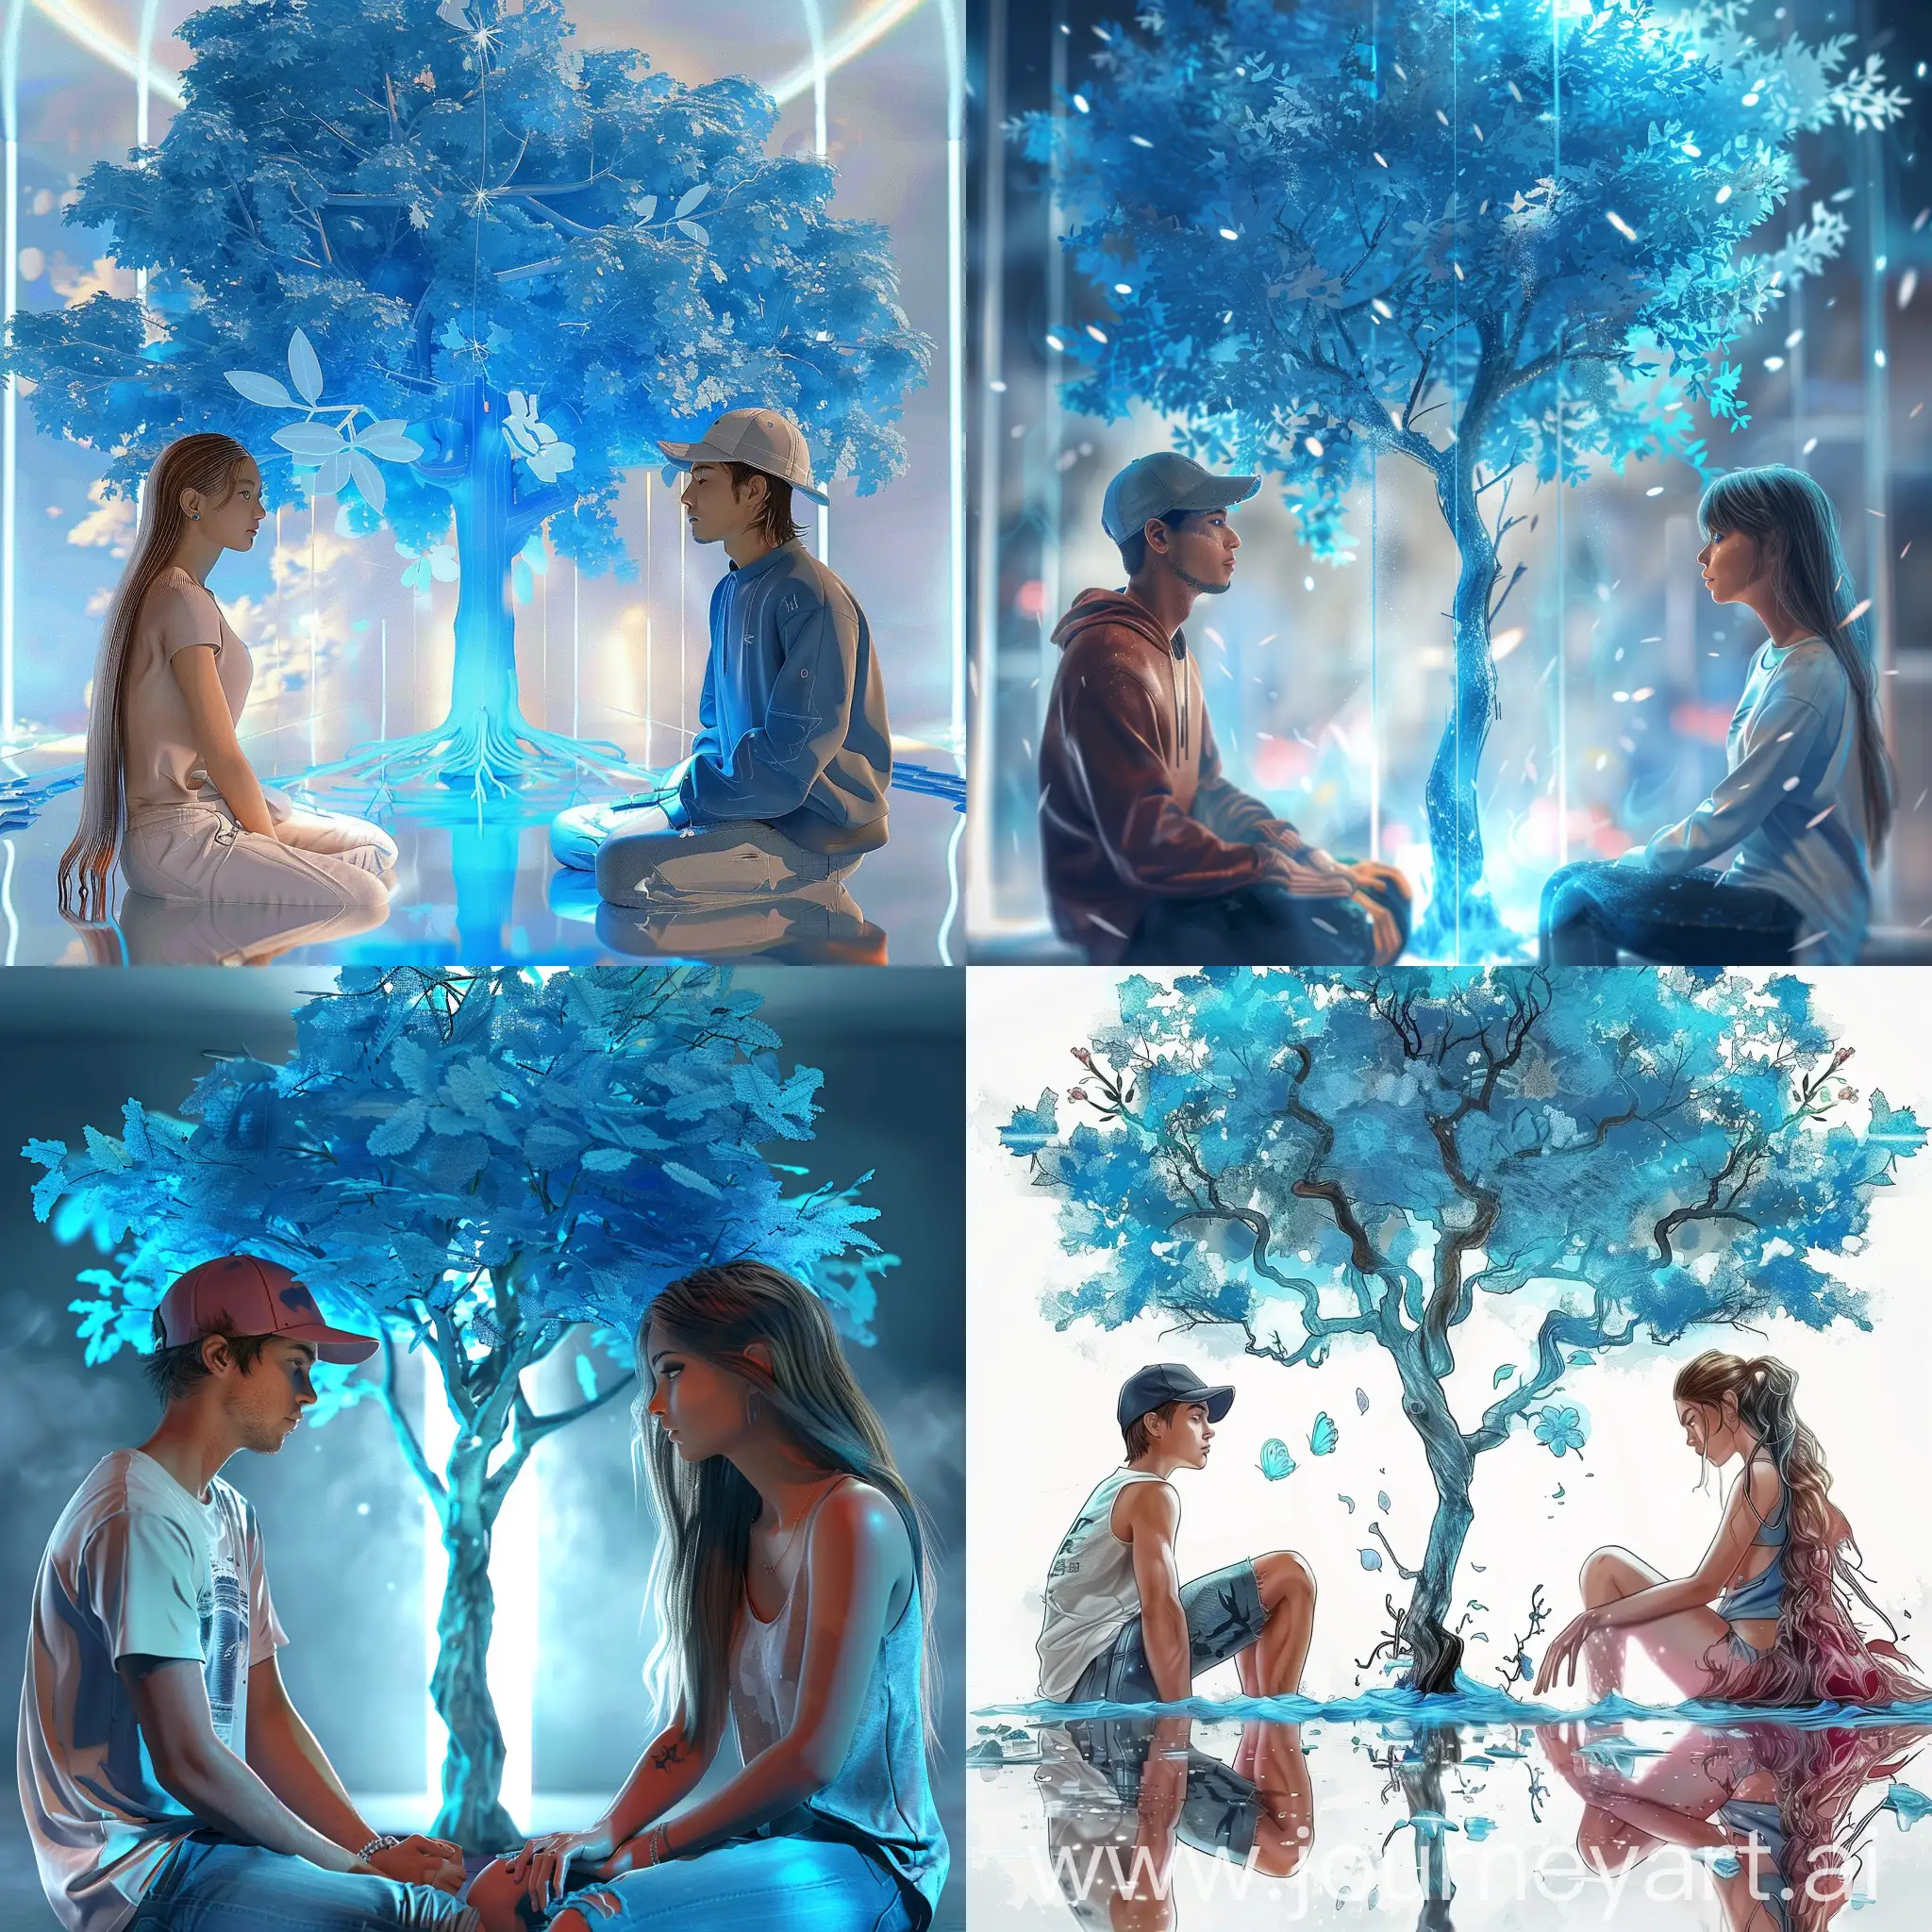 draw a cover for the track, there is a beautiful blue tree in the center, a guy and a girl are sitting on opposite sides of the tree, the girl is beautiful, the guy's face is not visible because of the cap, 3d style